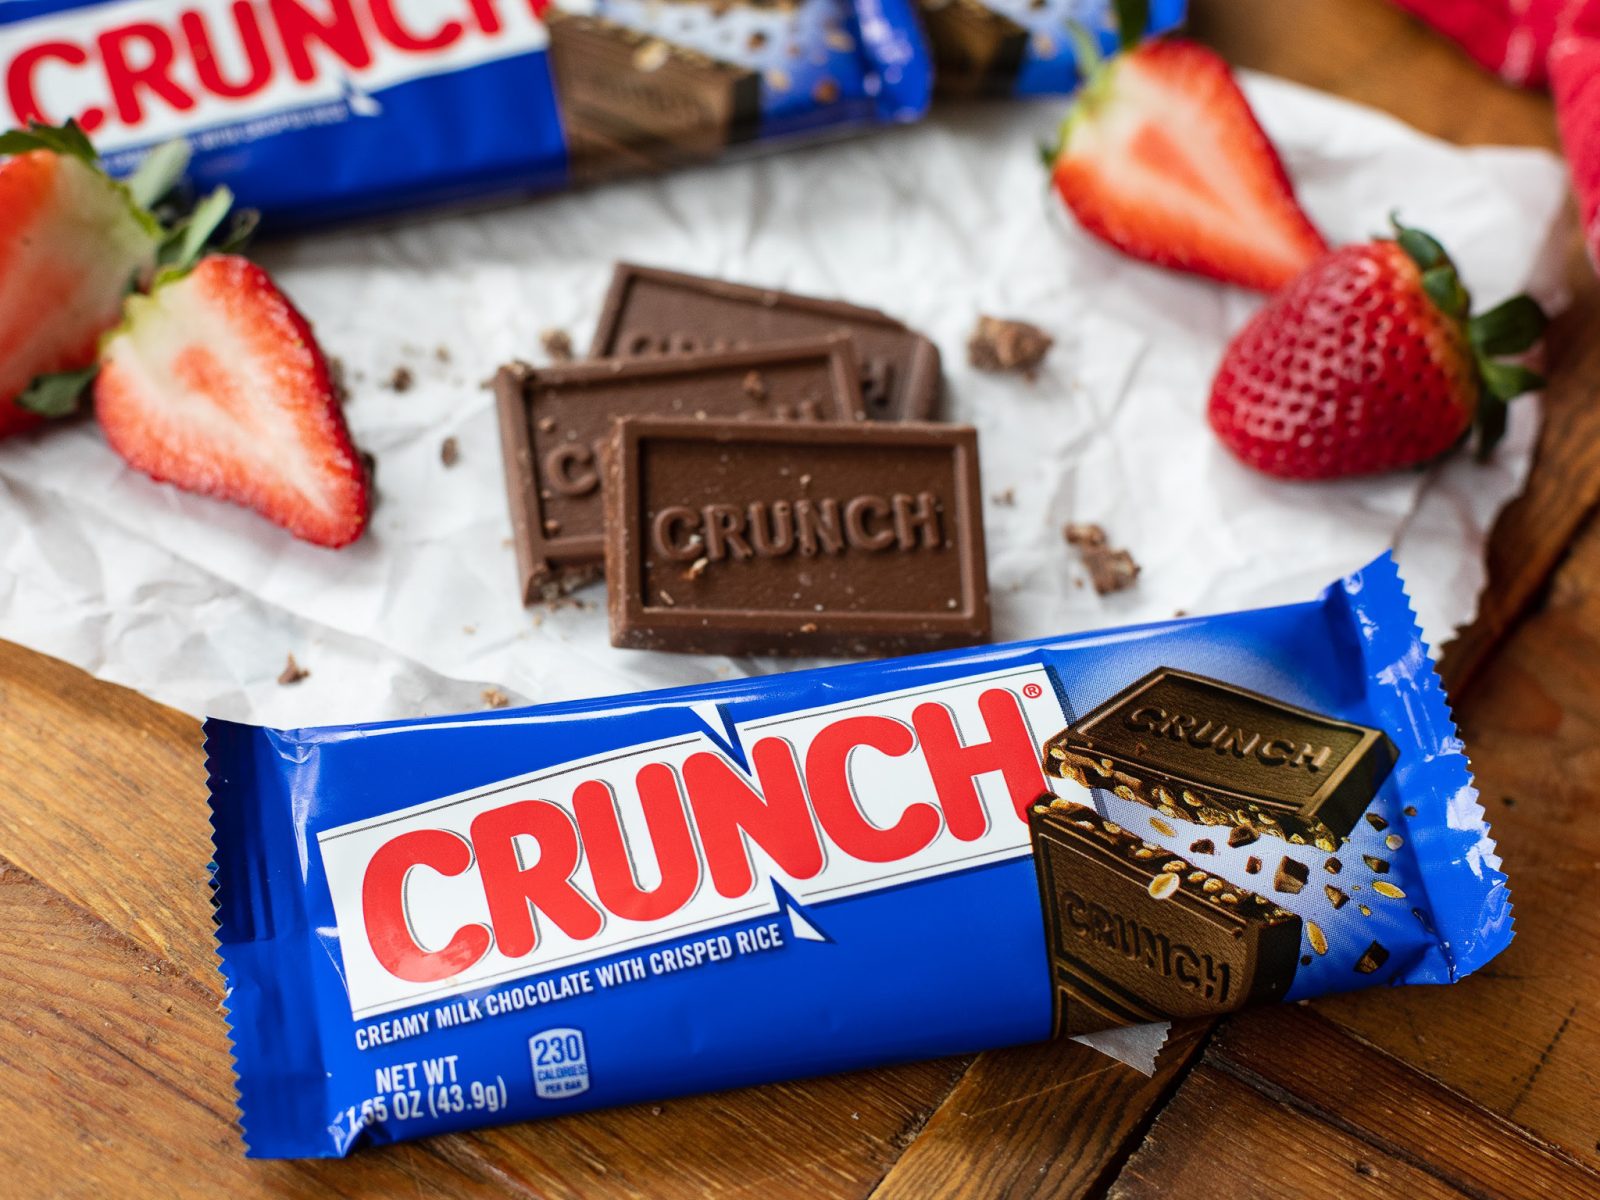 Grab Nestle Crunch Chocolate Bars For Just 88¢ At Kroger